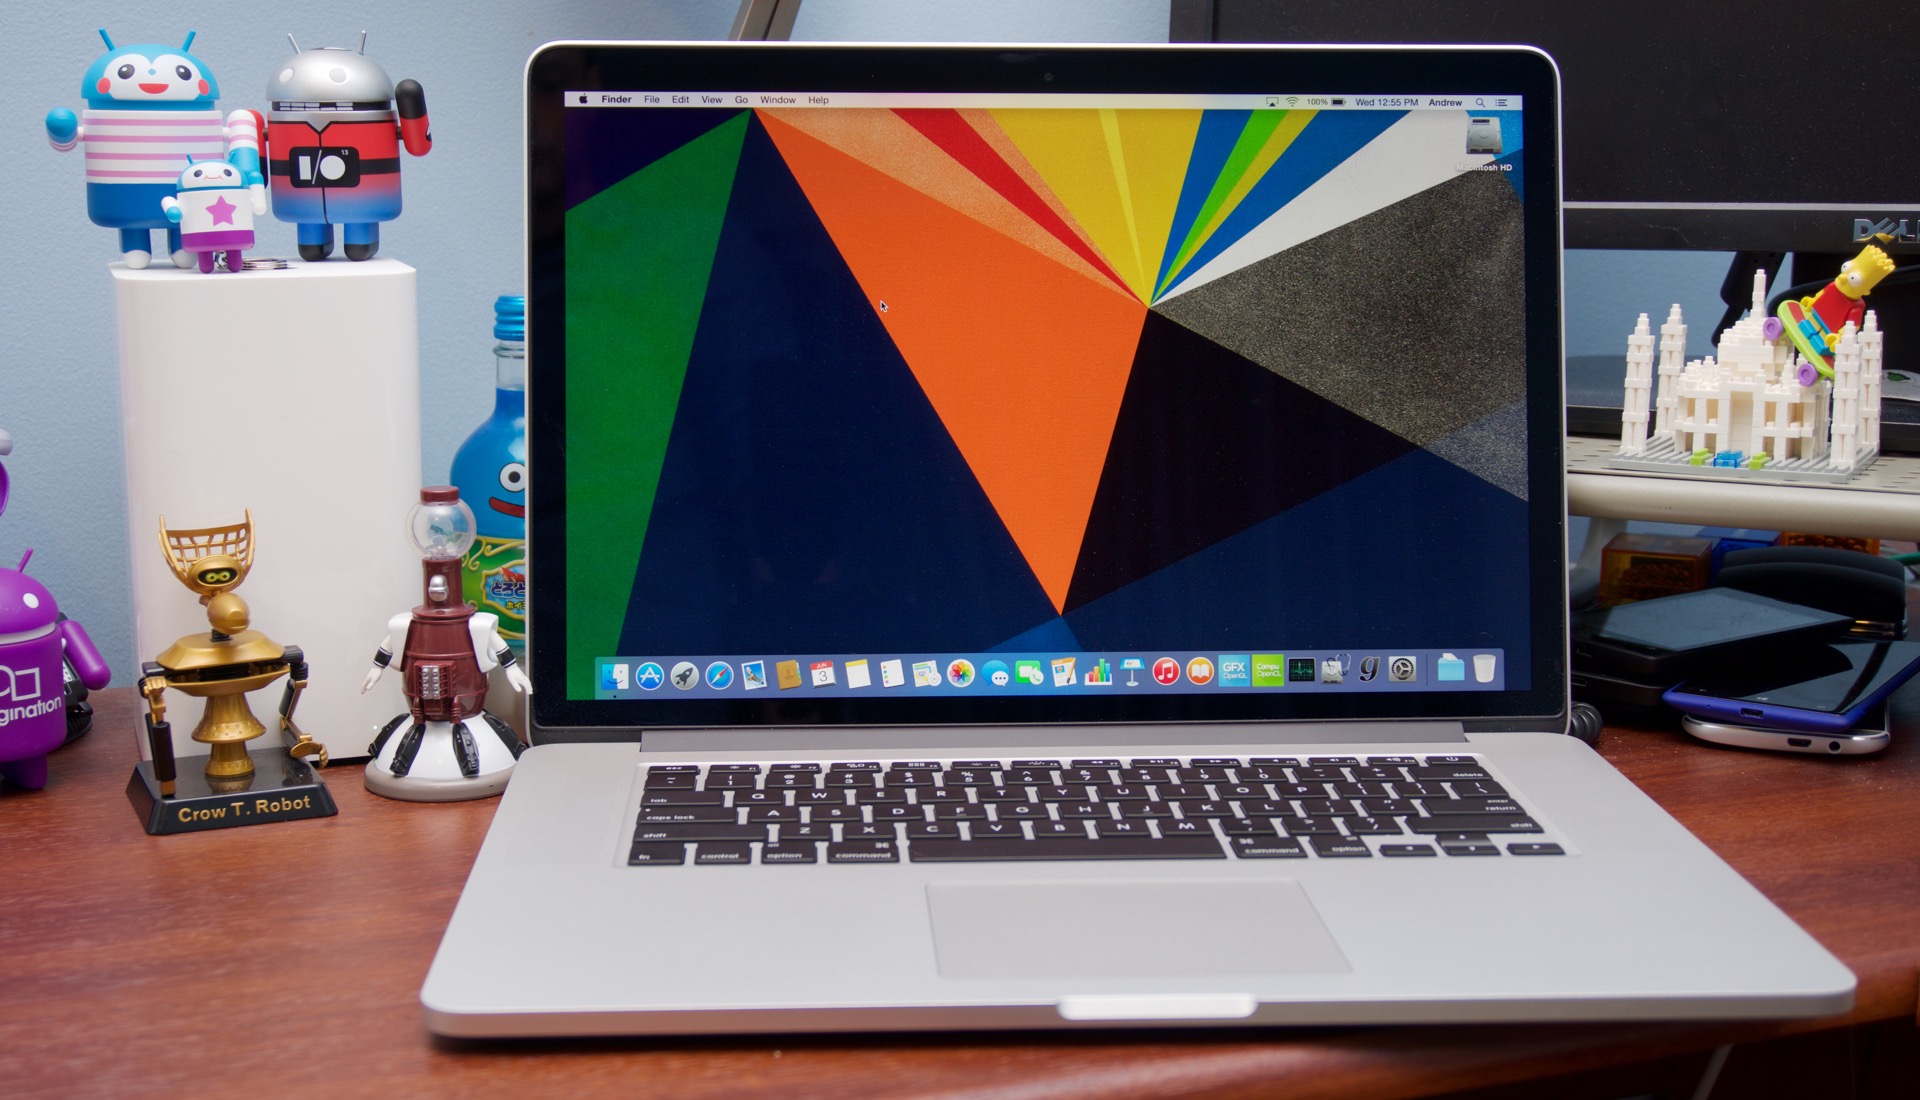 New model, two-year-old processor: The 2015 15-inch Retina MacBook